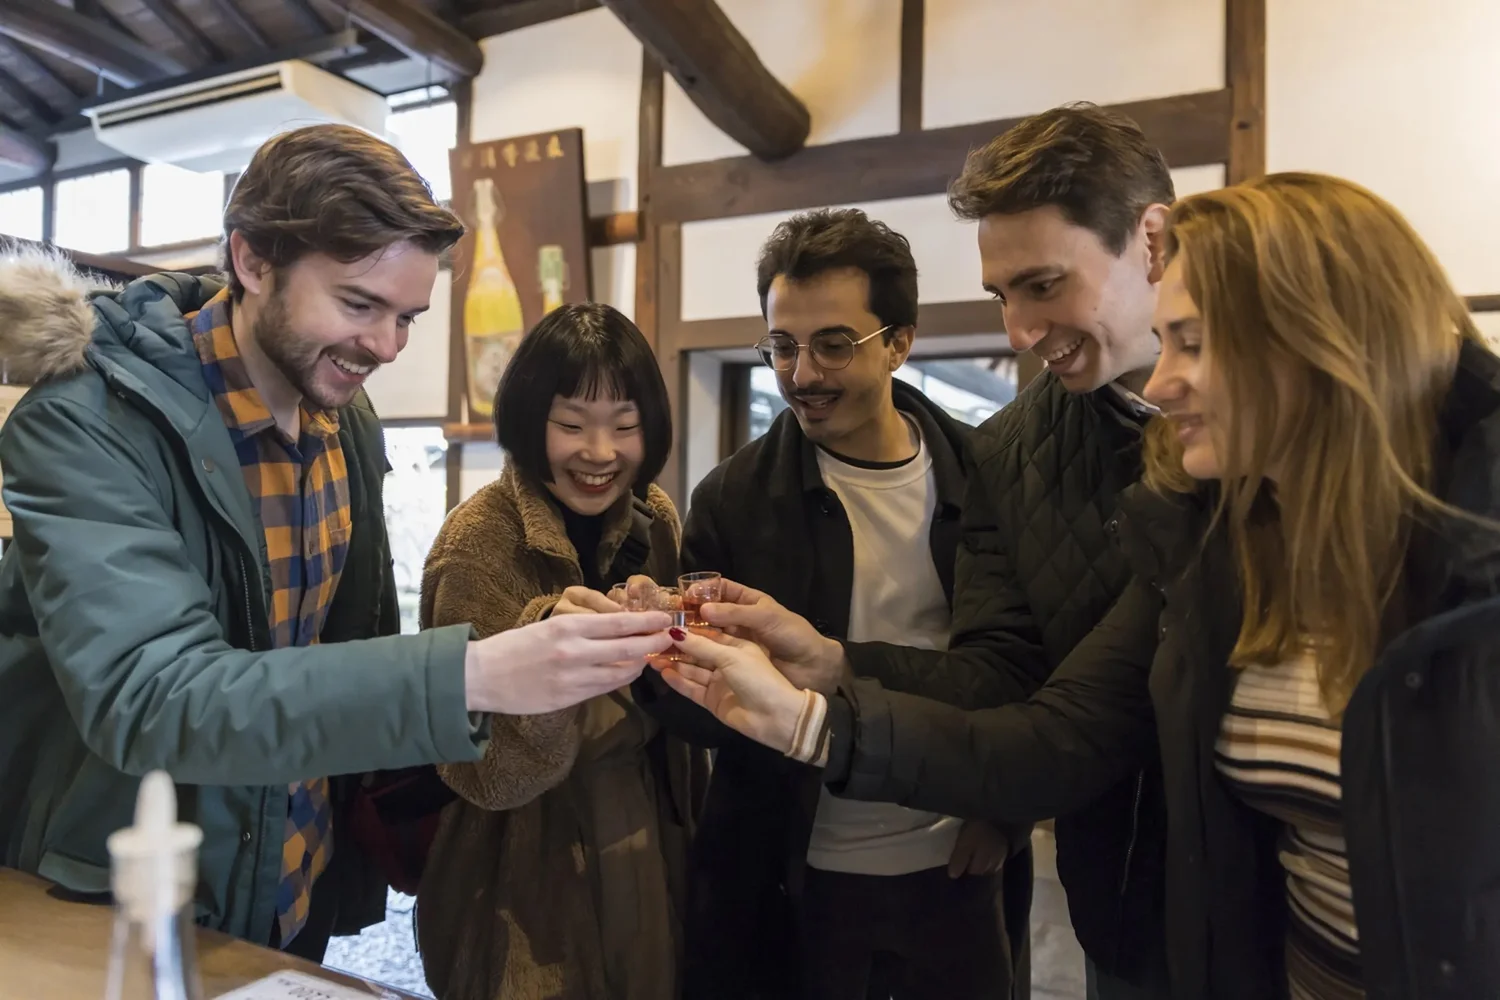 Book a Kyoto Sake Brewery Tour with English Guide